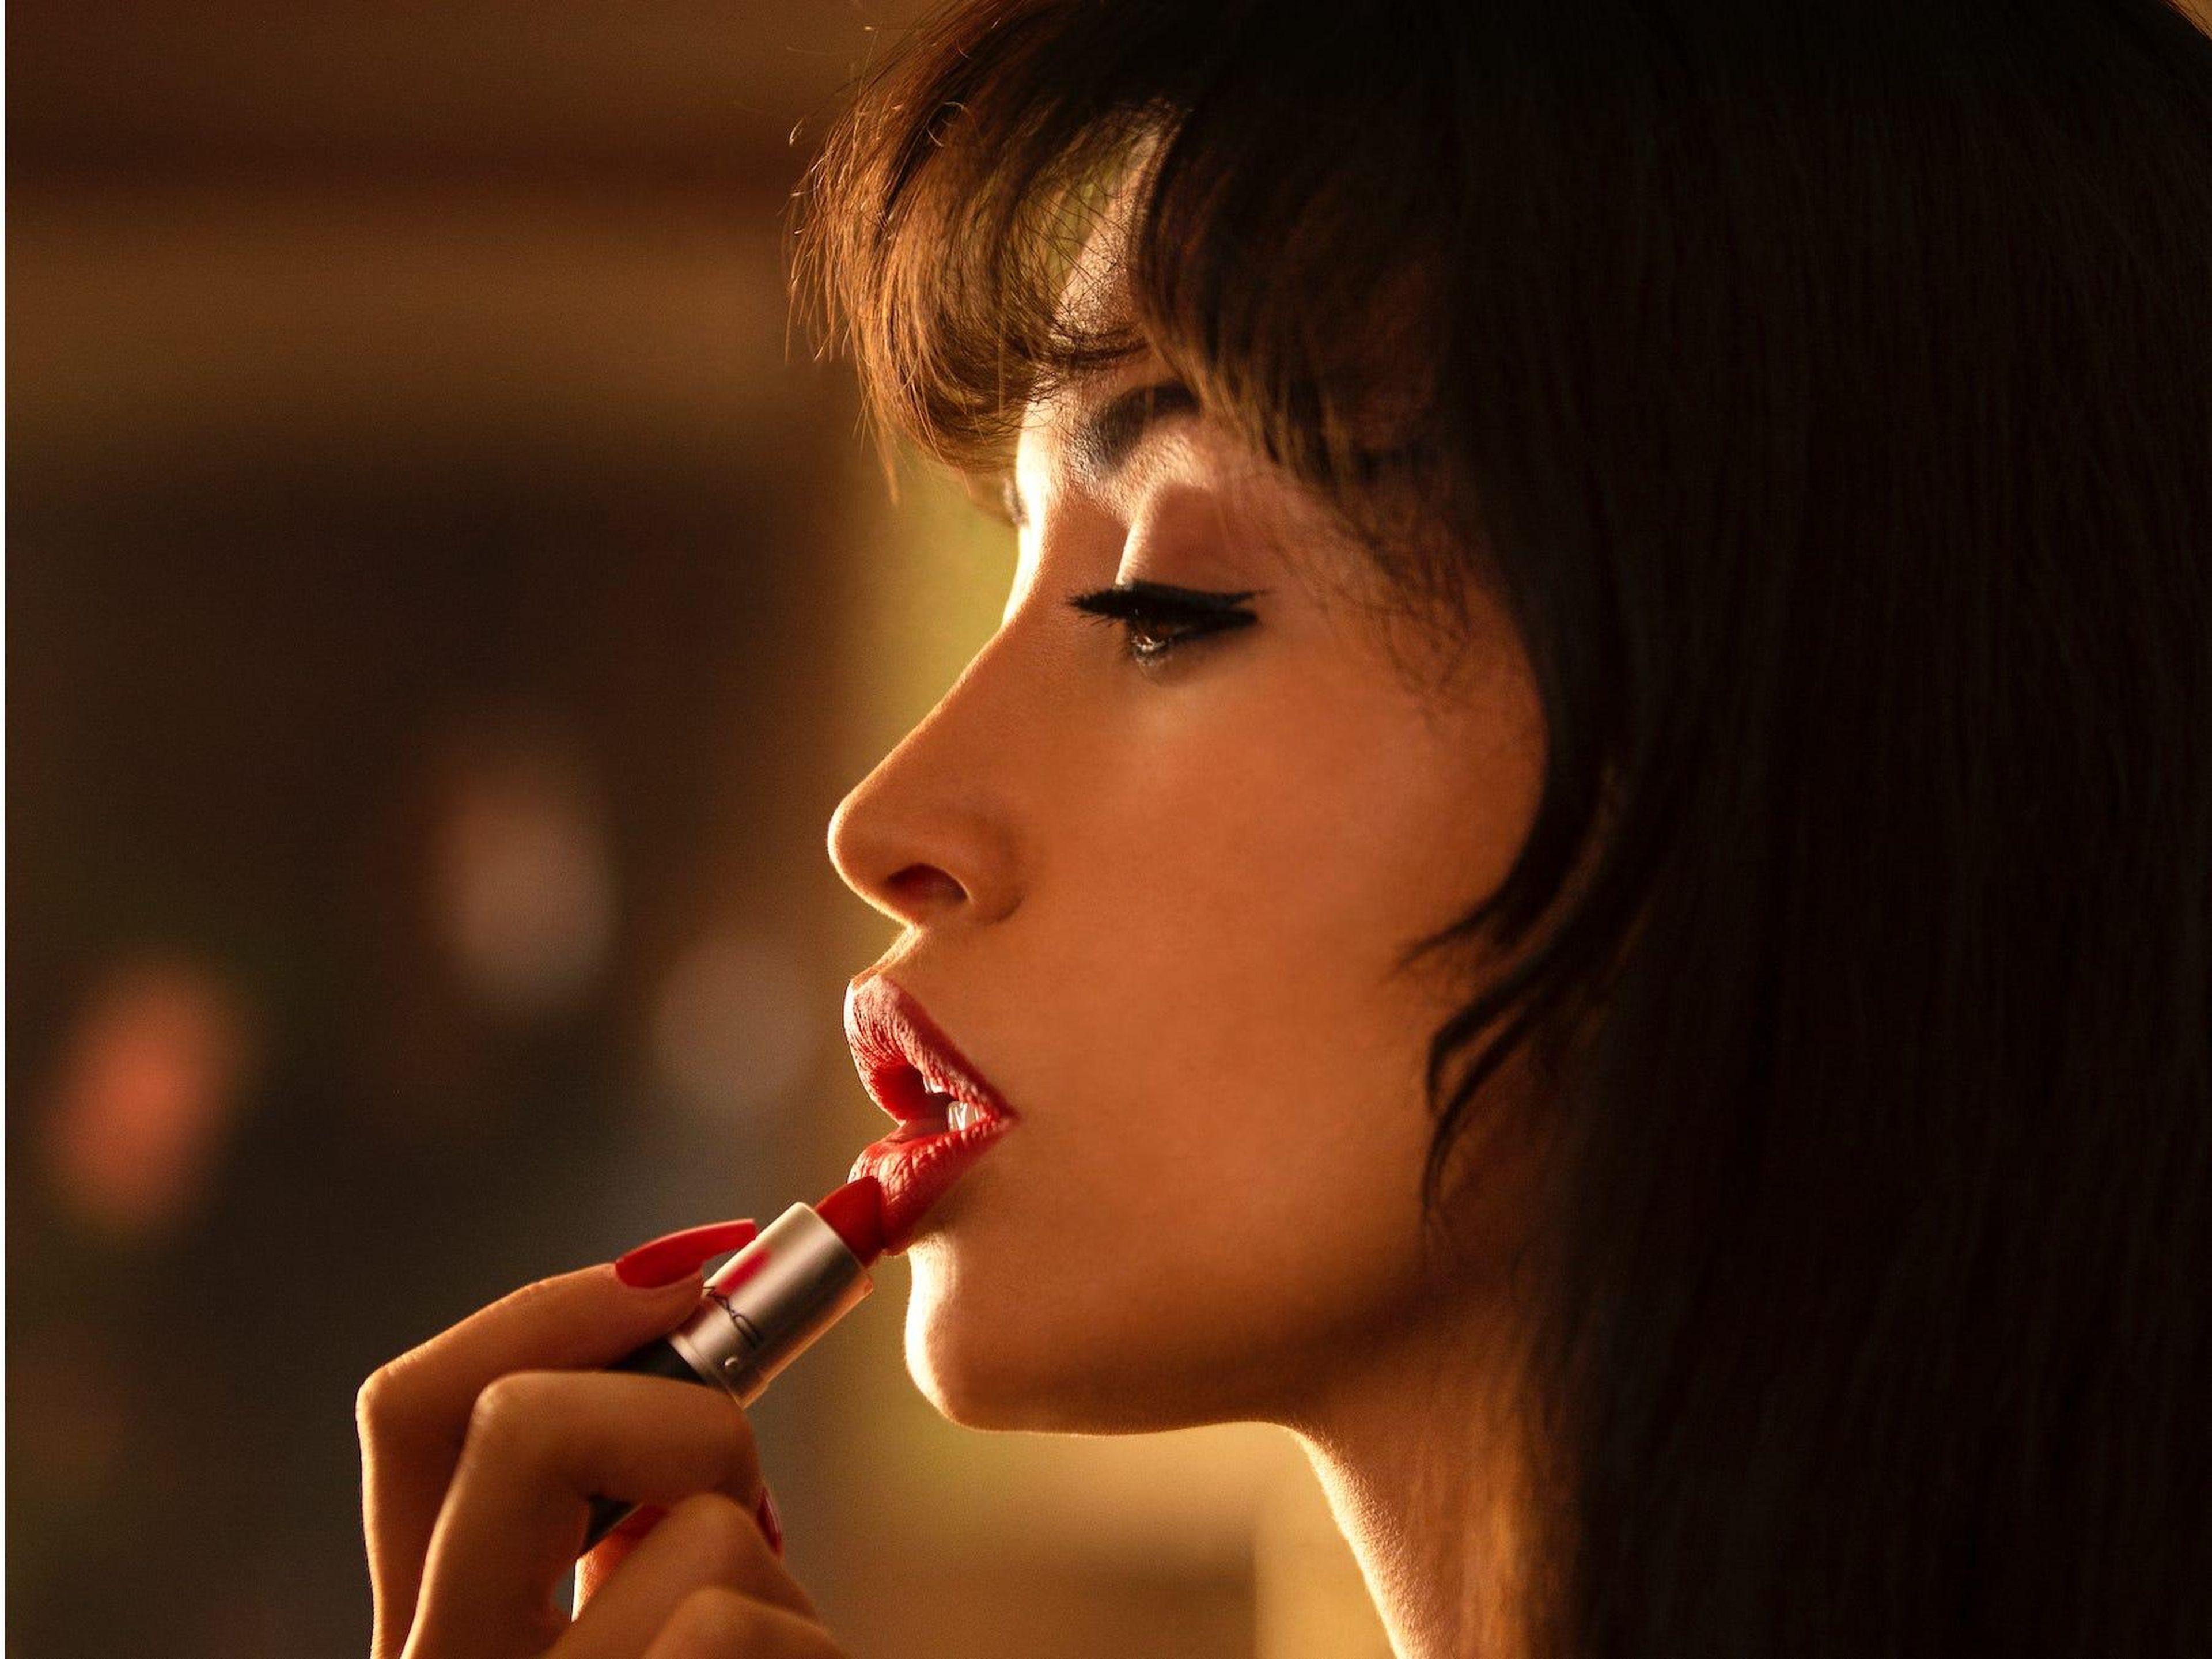 The first look at Christian Serratos in the role of Selena.